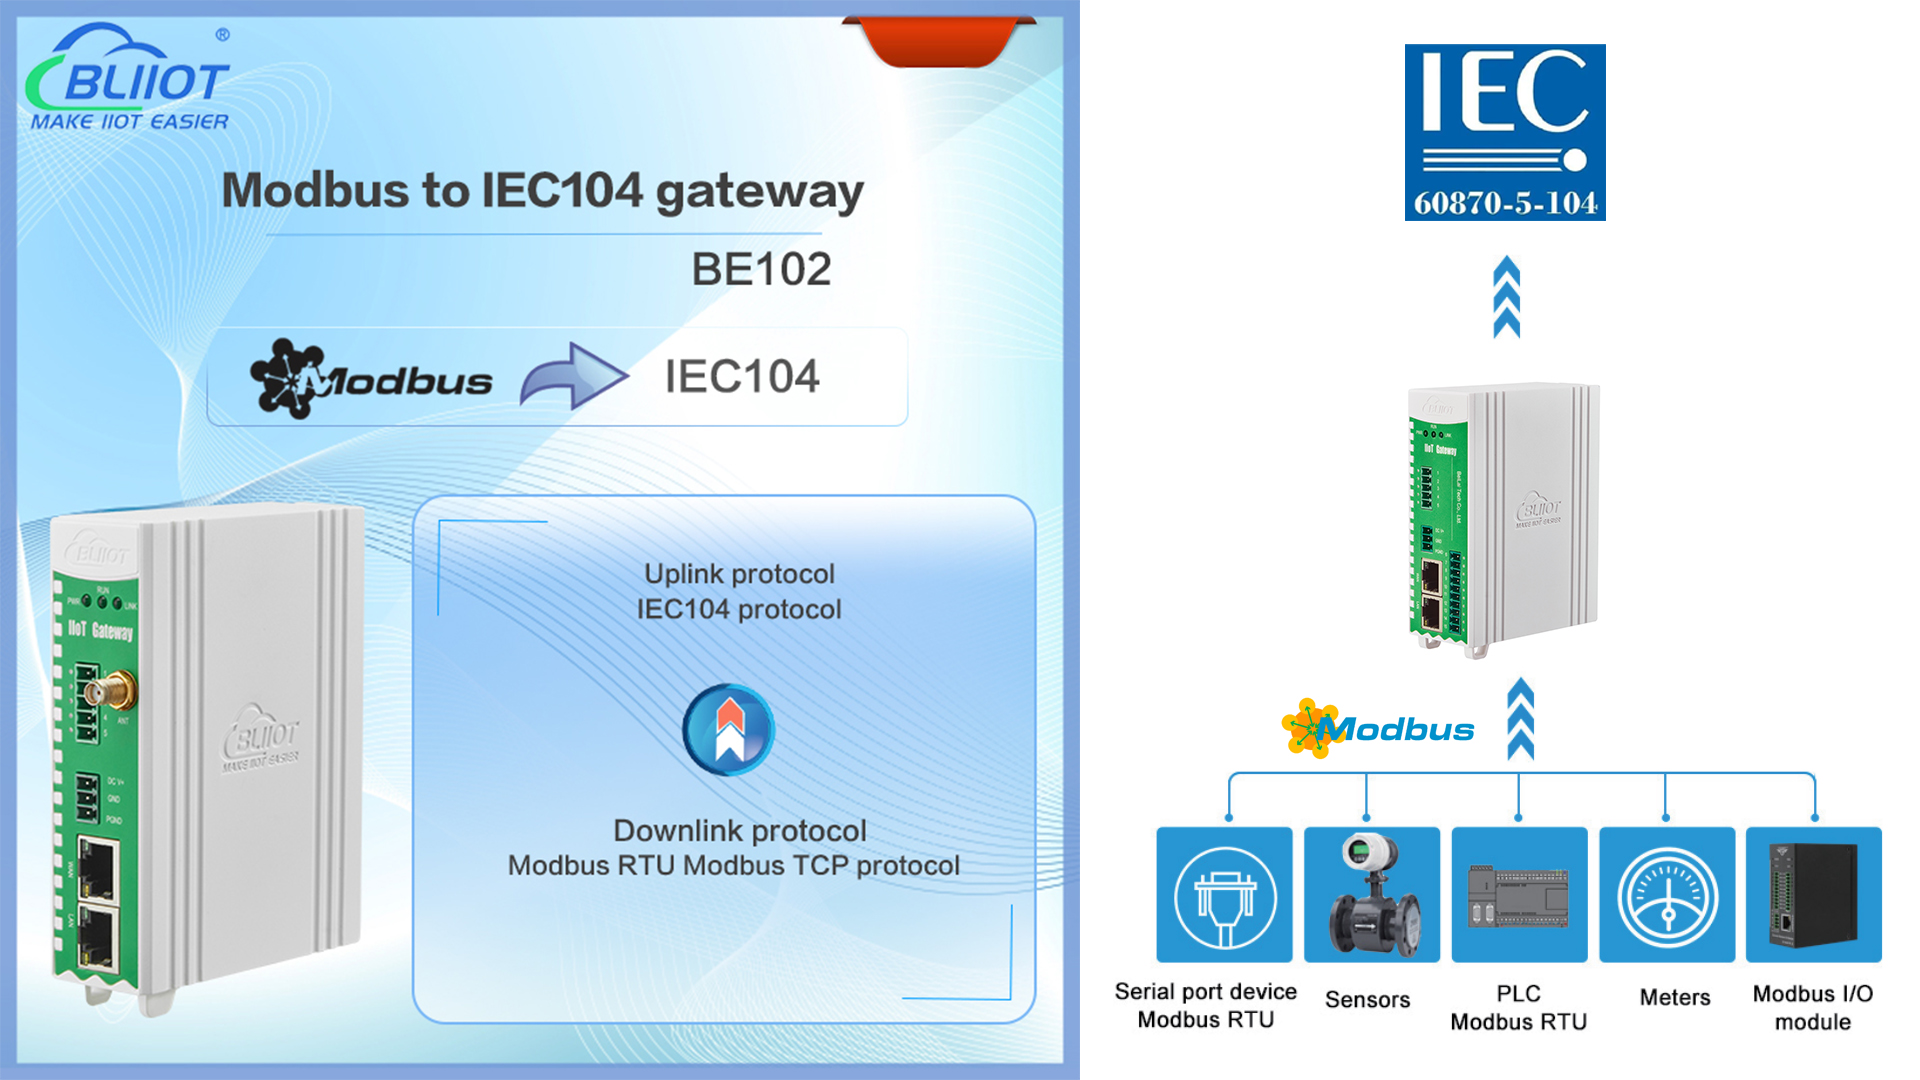 BLIIoT|New Version BE102 Modbus to IEC104 Gateway in Various Industrial IoT Applications